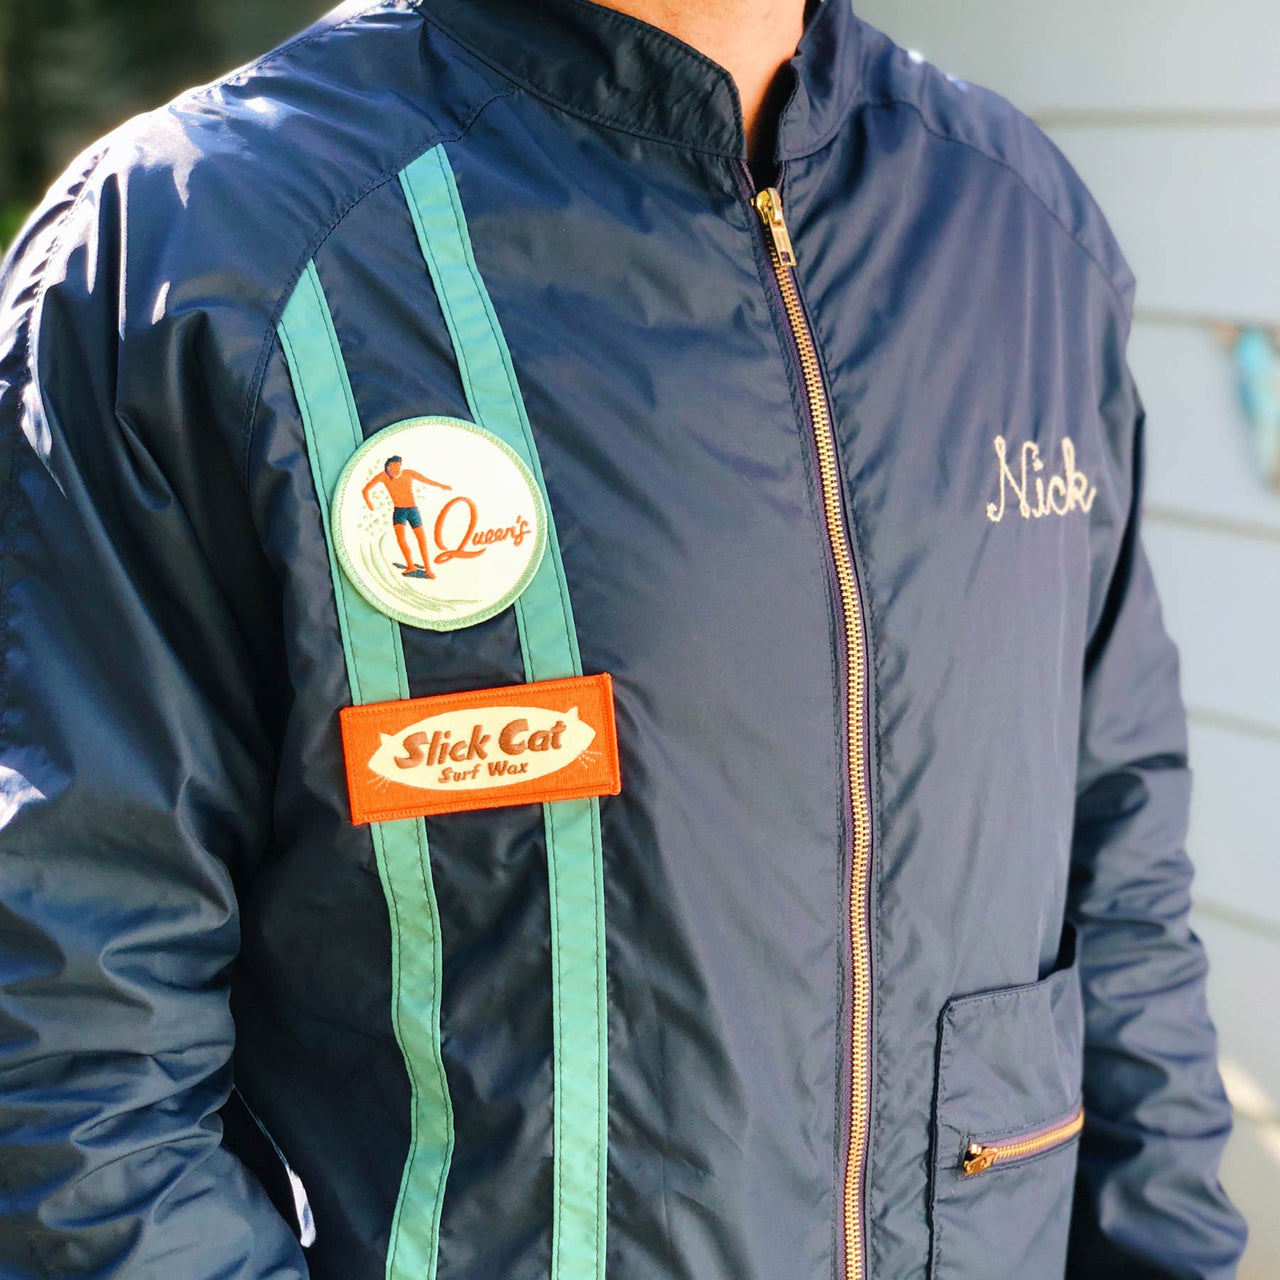 60's style surf competition jacket with patches by Nick Kuchar